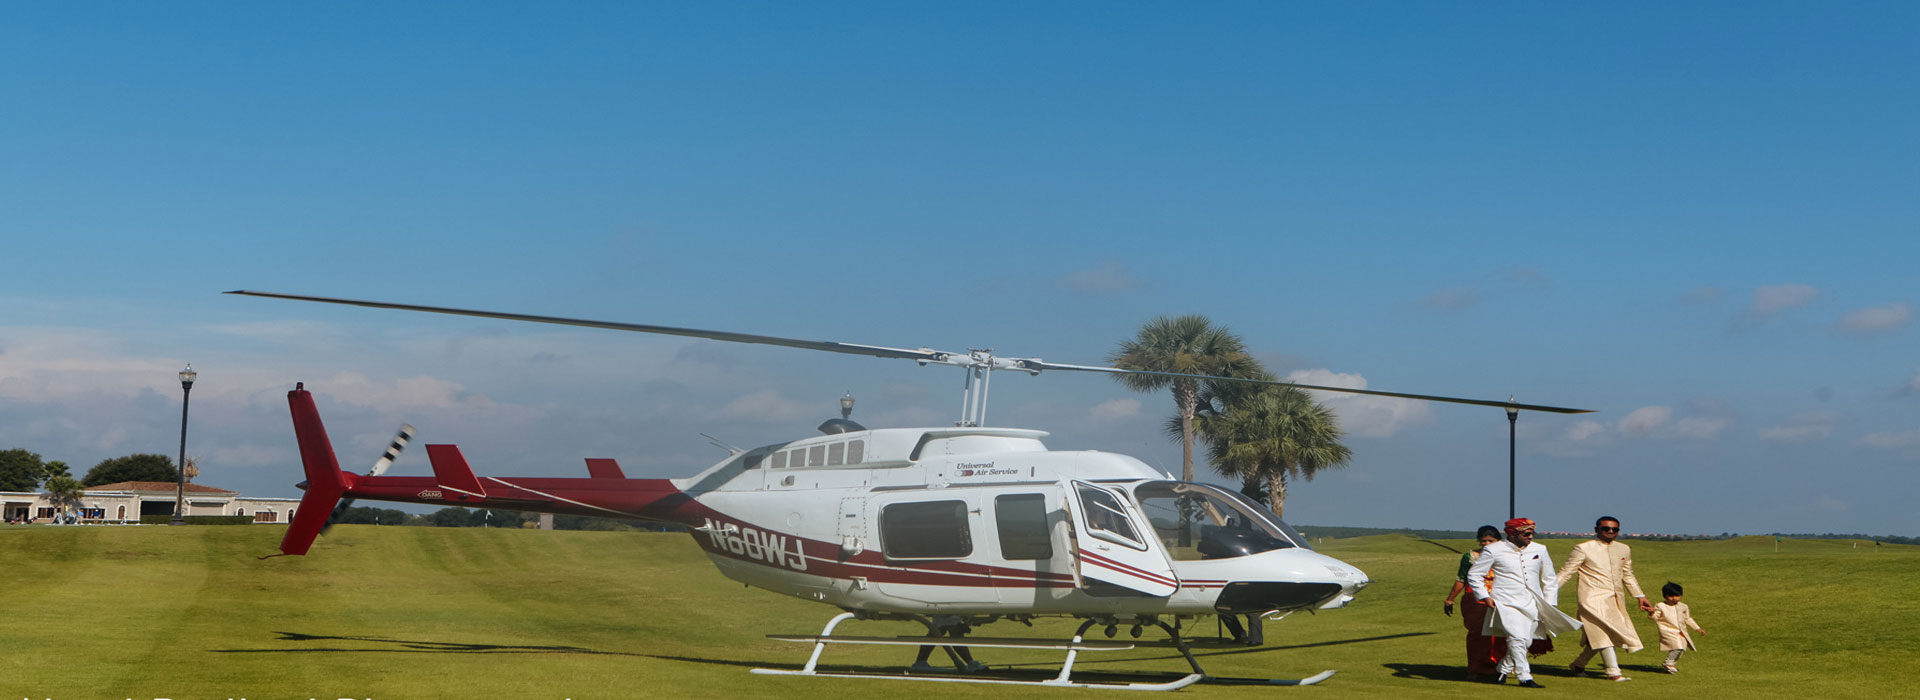 charter helicopter for rent